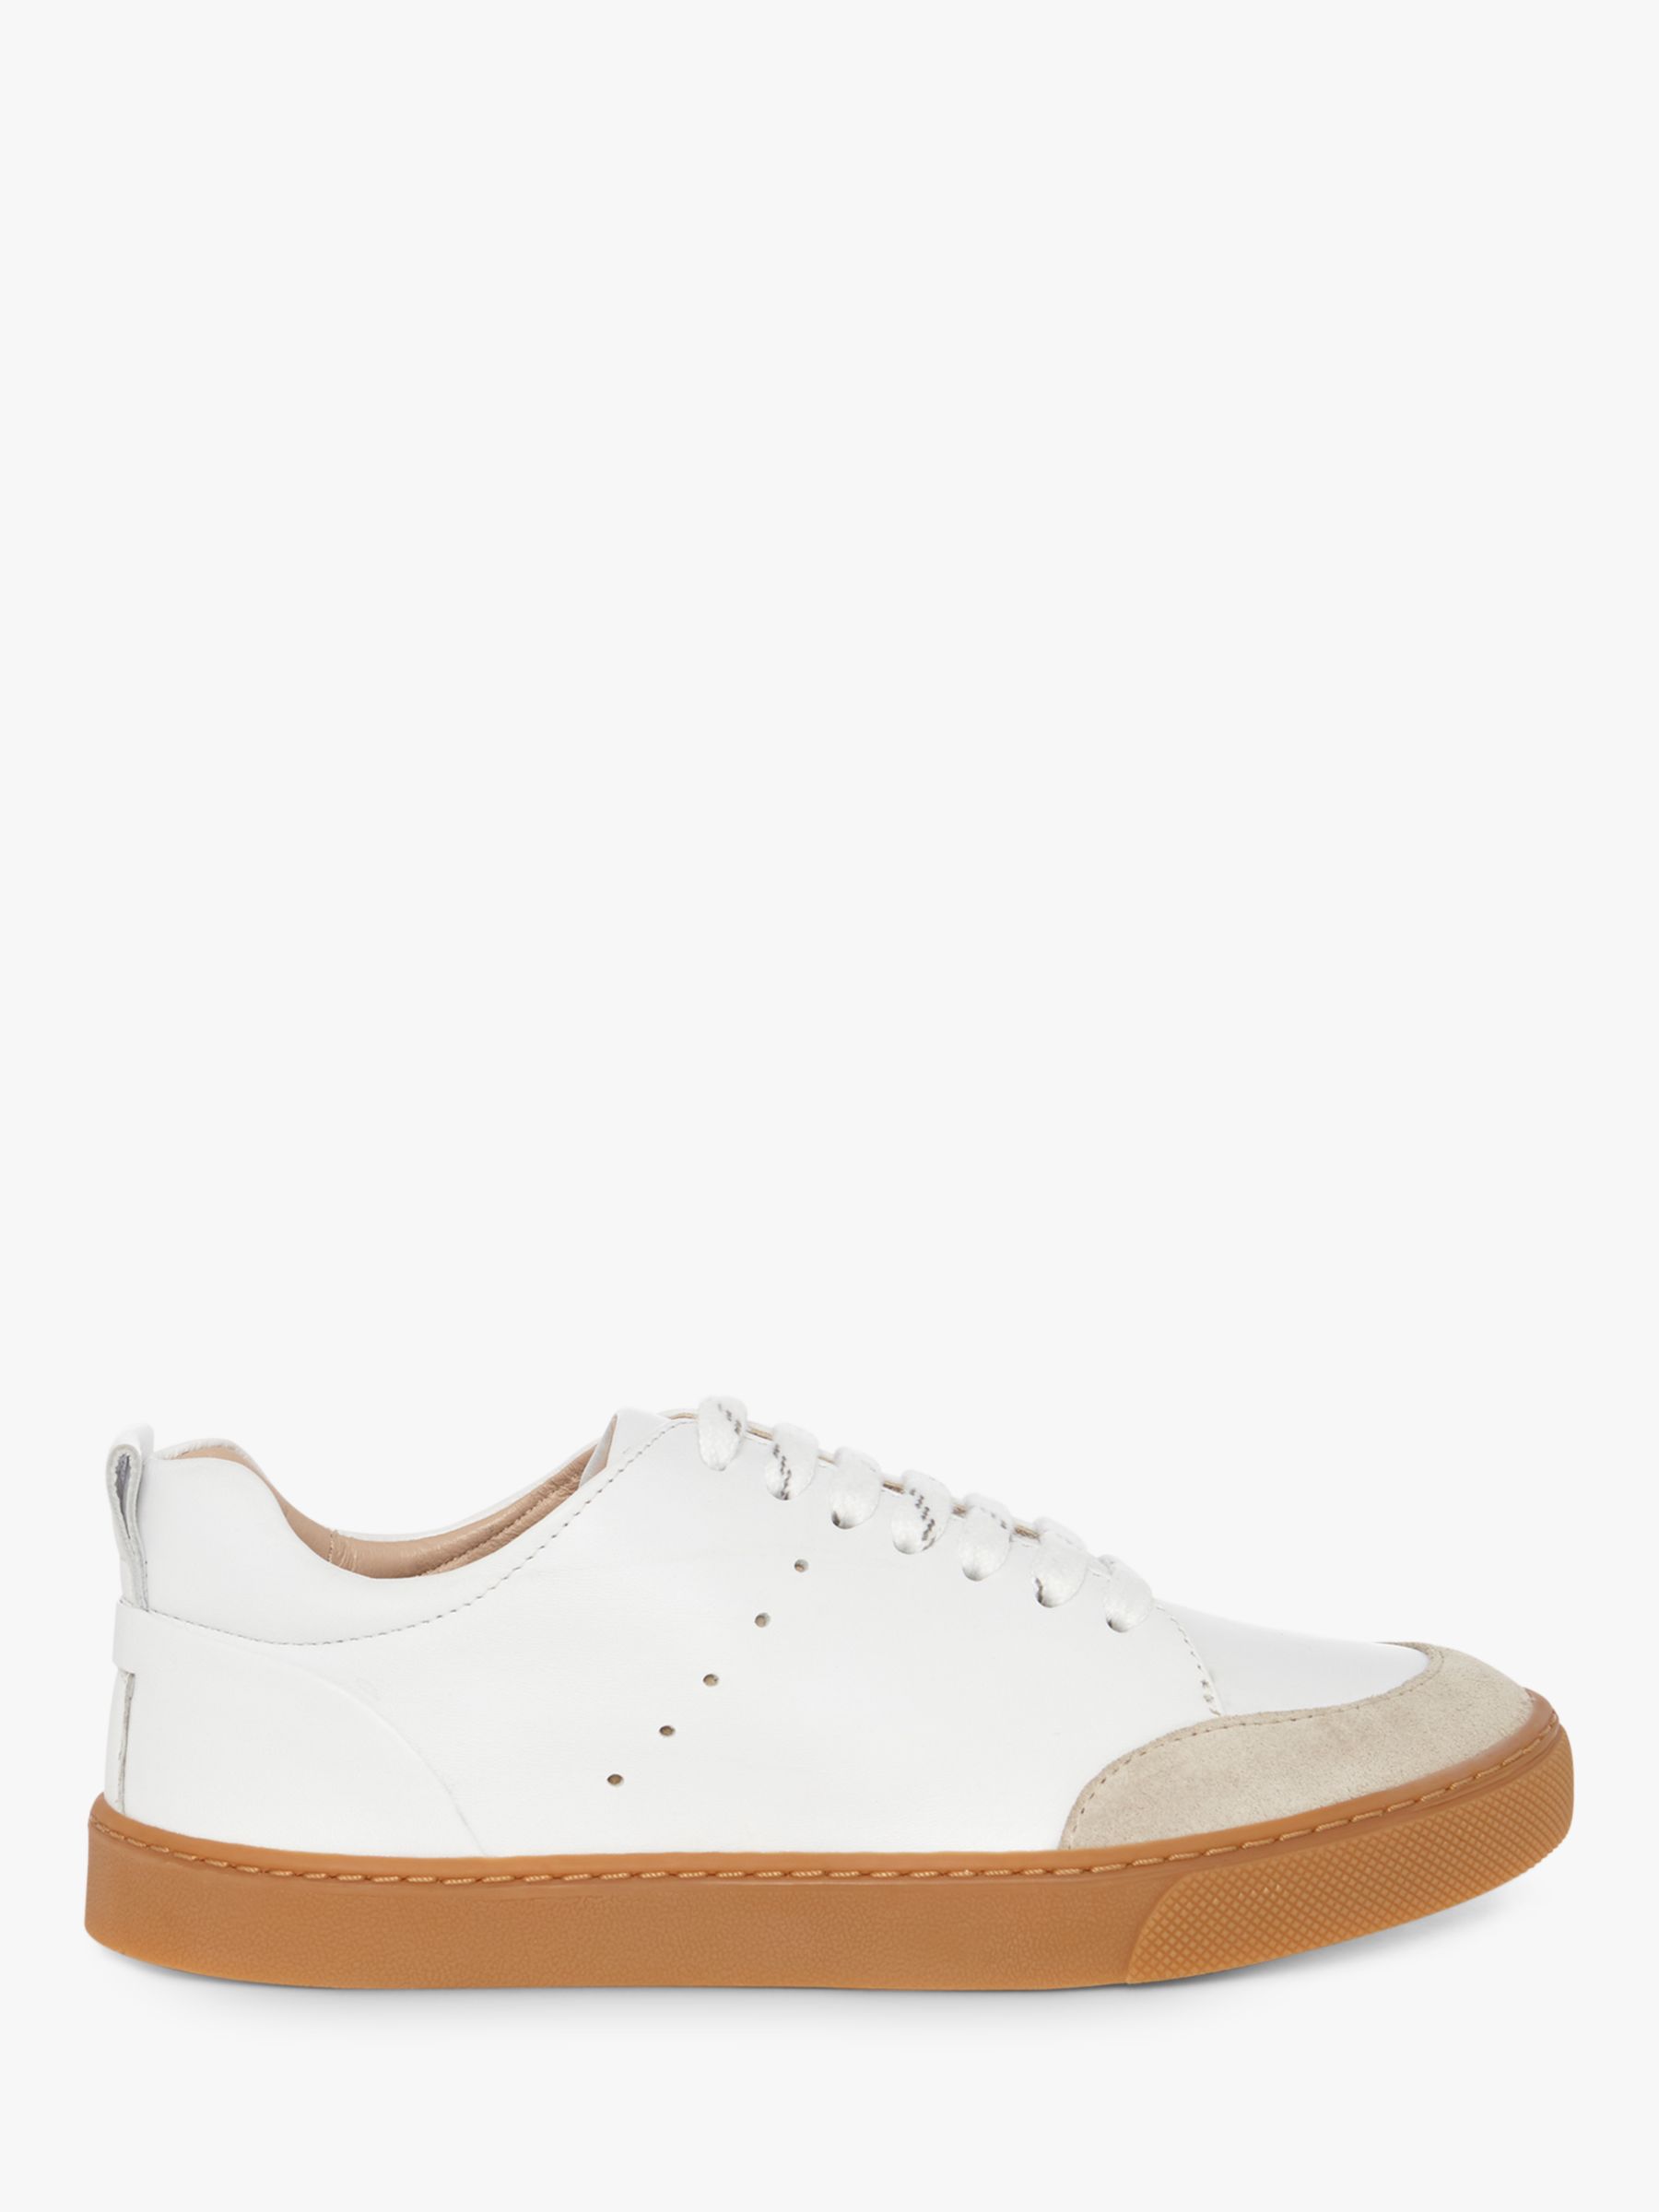 Hobbs Liberty Leather Flat Trainers, White at John Lewis & Partners